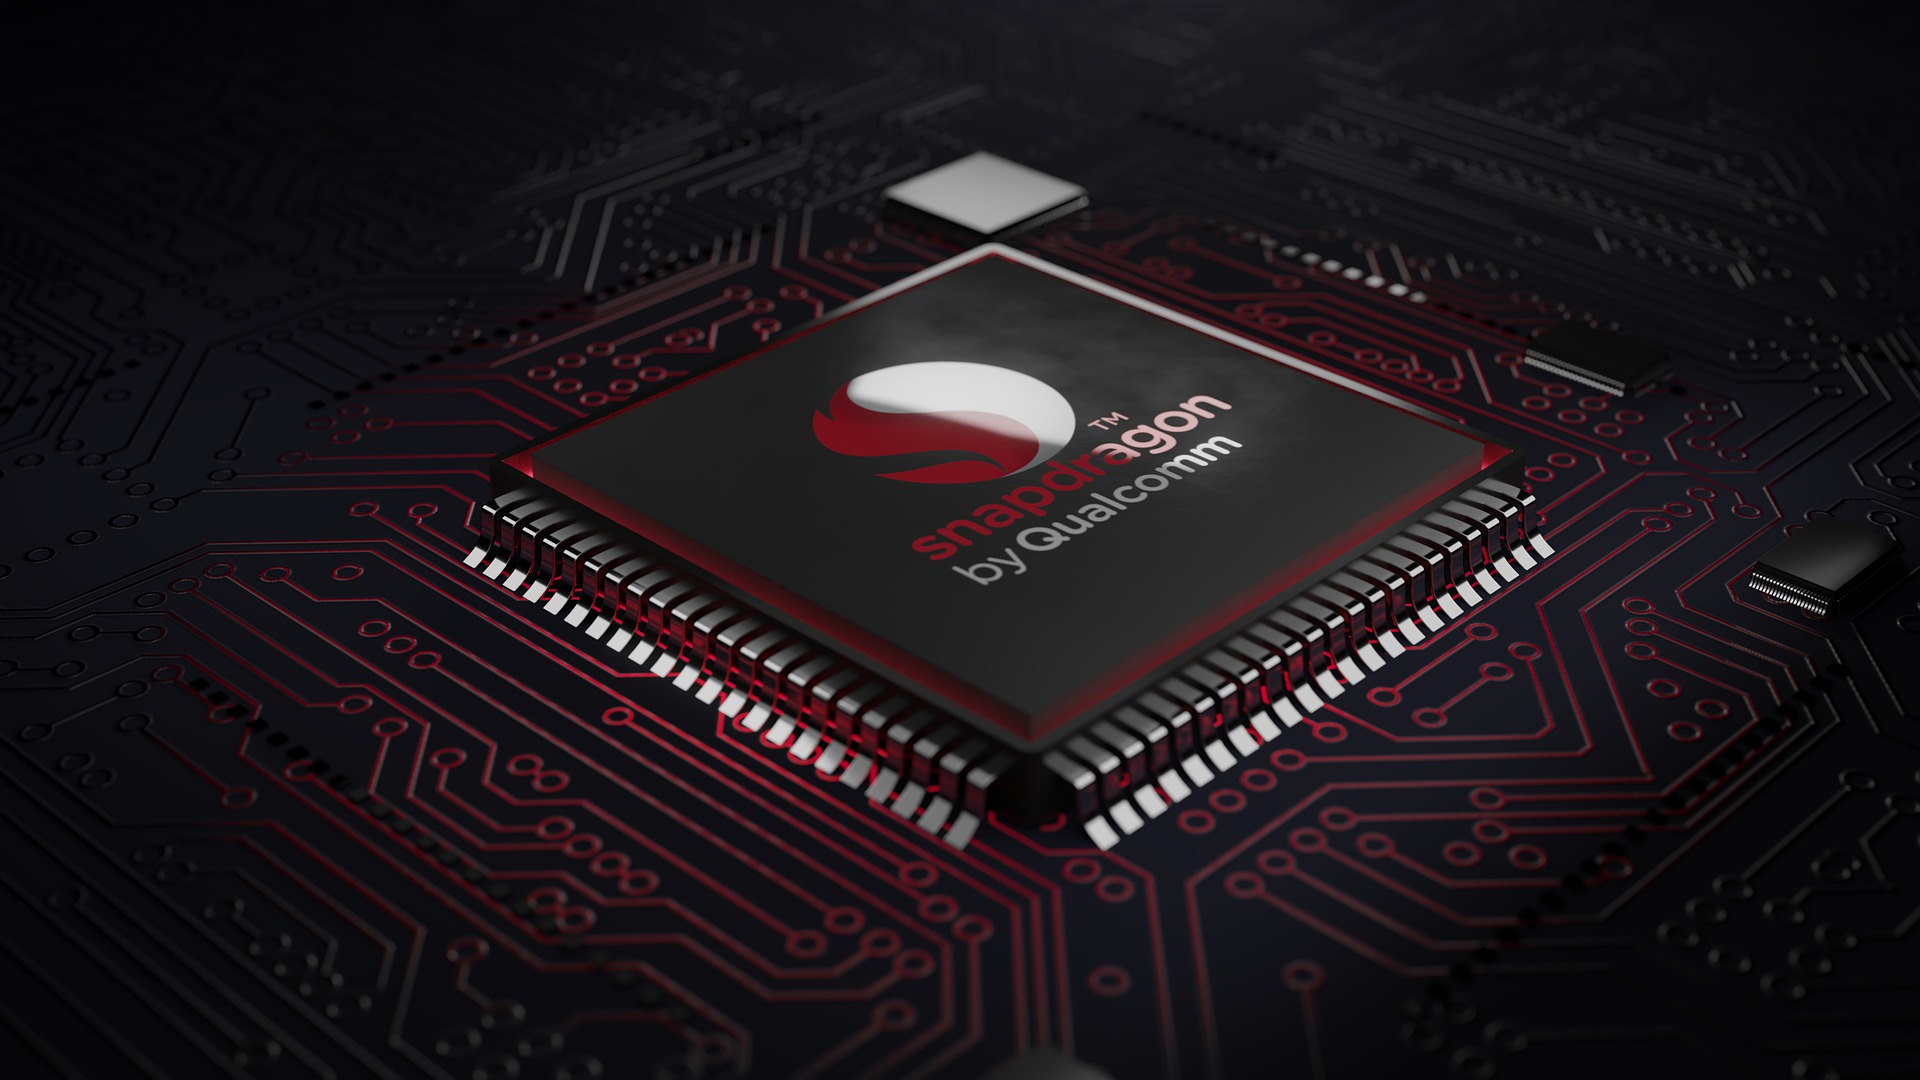 Qualcomm chooses to switch around its naming plan for future Snapdragon chipsets